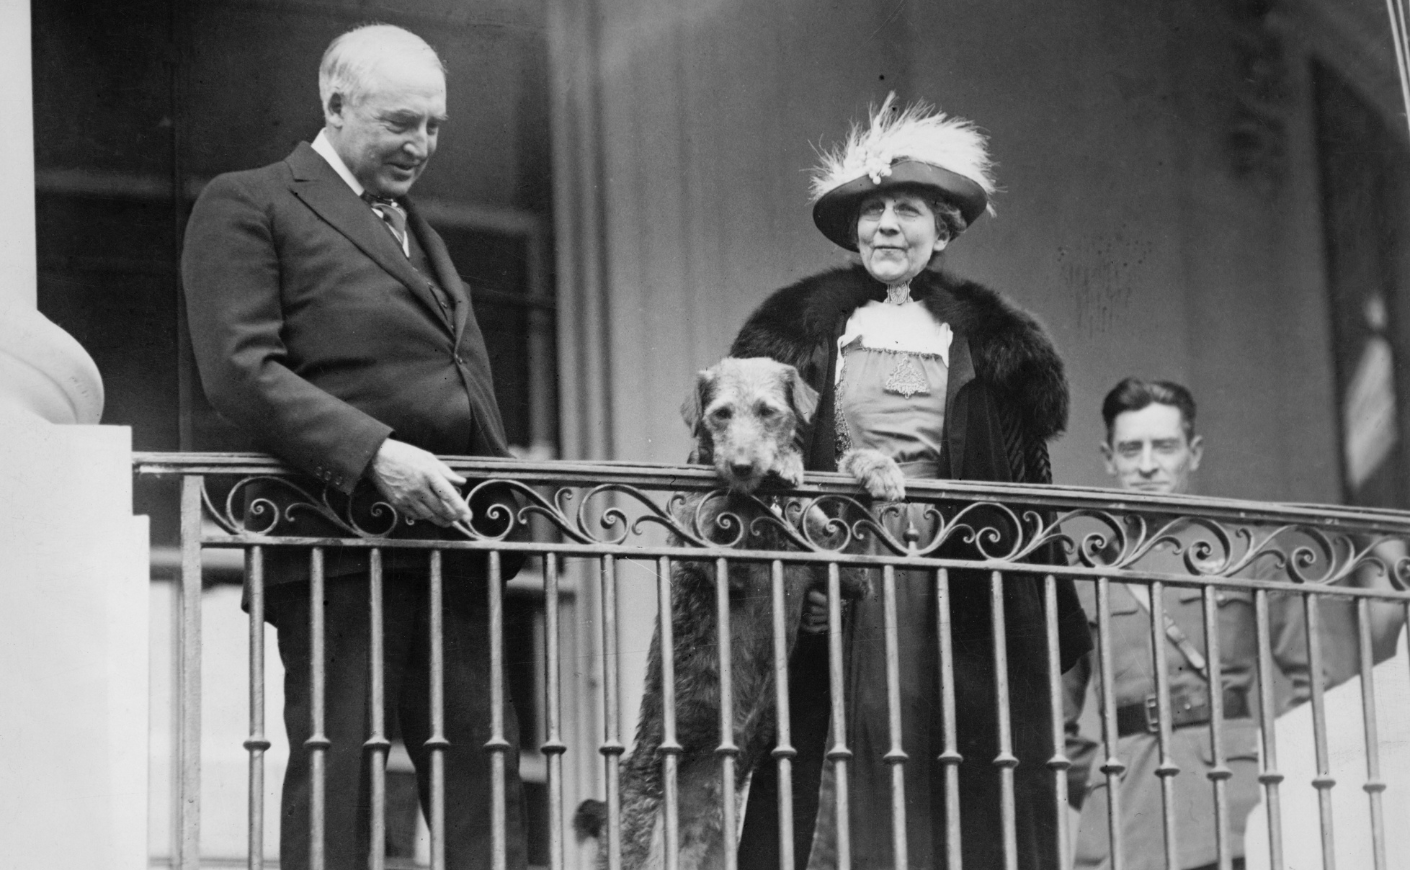 President Warren G. Harding and First Lady Florence Harding watch from a balcony as an annual Easter event takes place on the White House lawn, circa 1922. With them is their pet dog, Laddie Boy.